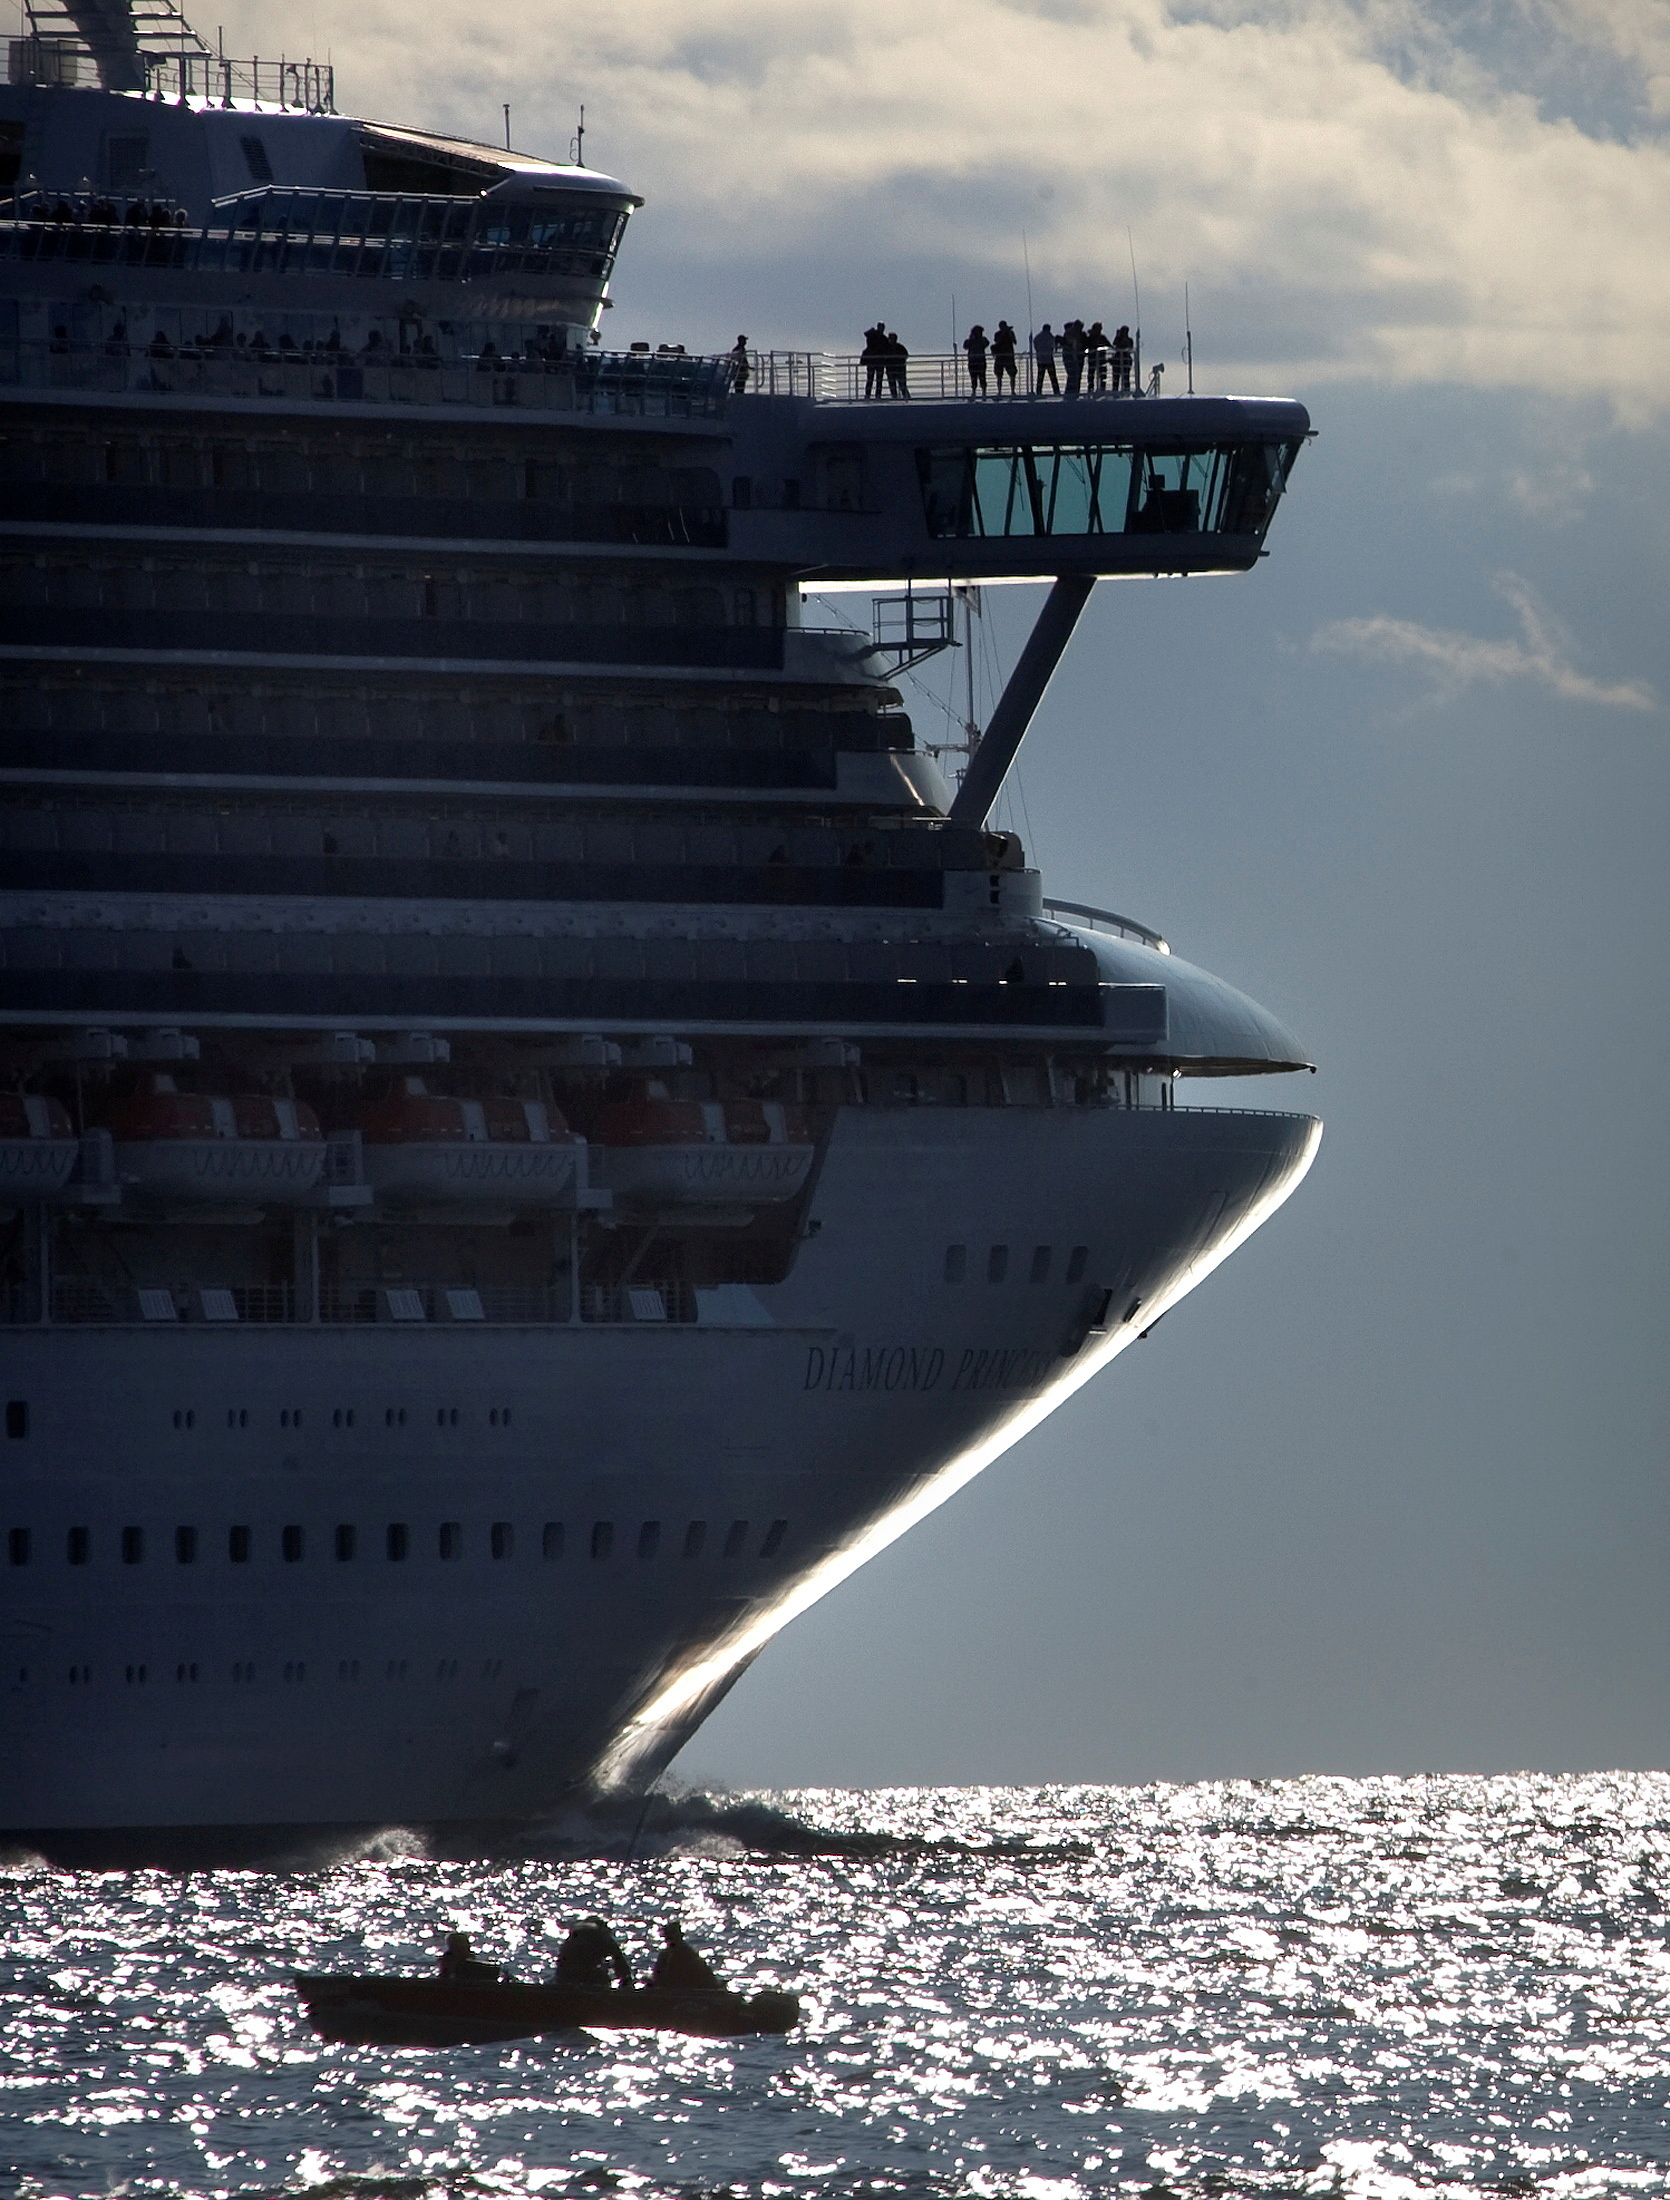 Cruise ship Diamond Princess passes by a small boat as it heads out to sea from Vancouver